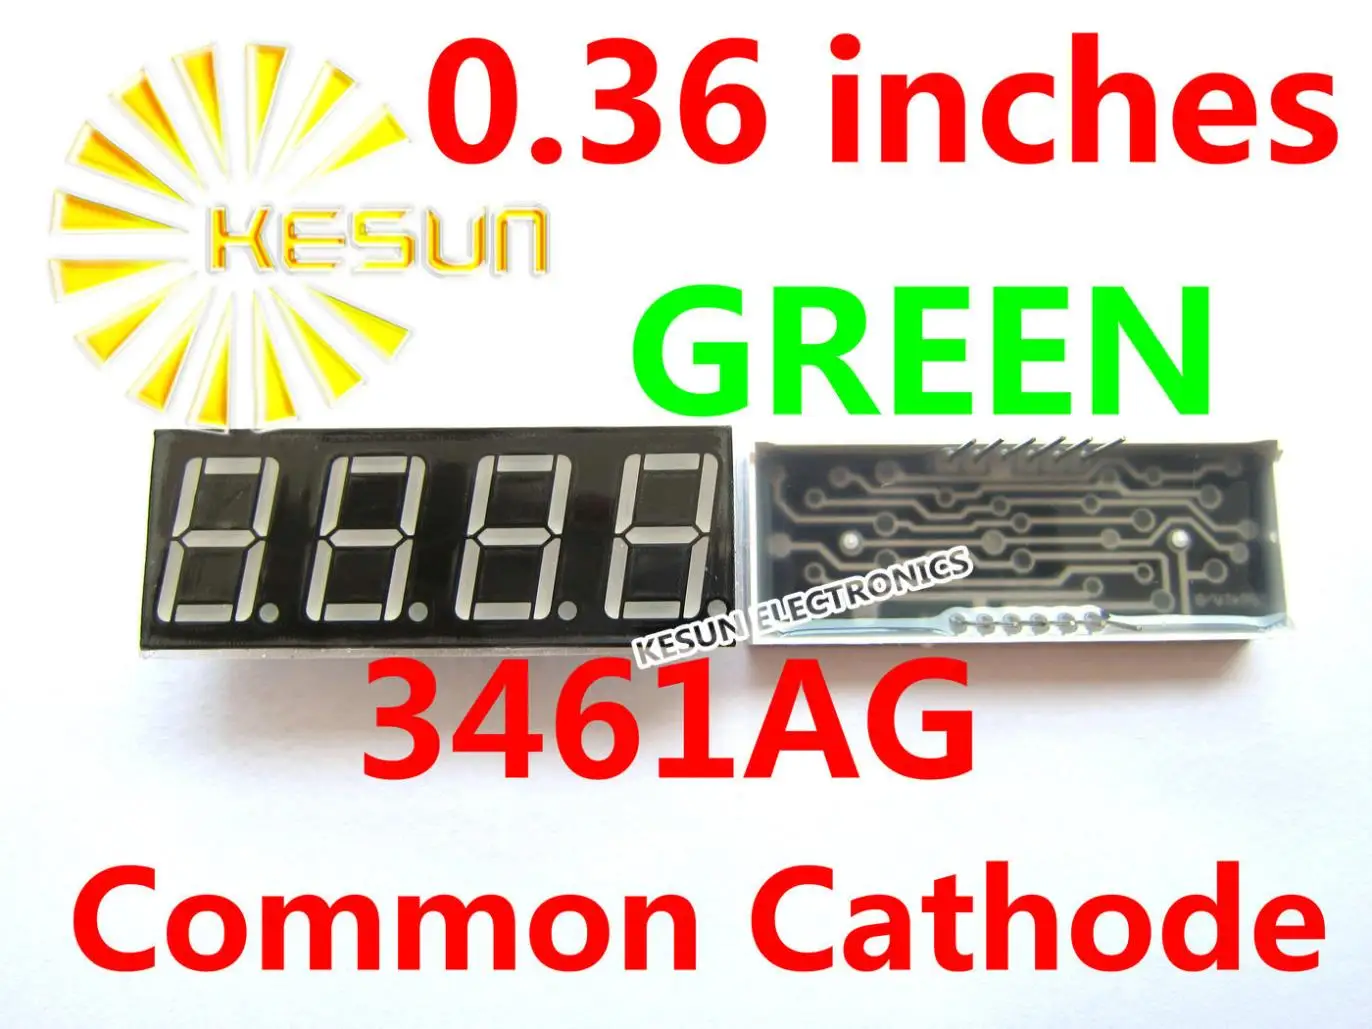 

50PCS x 0.36 inches Green Red Blue Jade Green Common Cathode/Anode 4 Digital Tube 3461AG 3461AGG 3461AB LED Display Light Beads